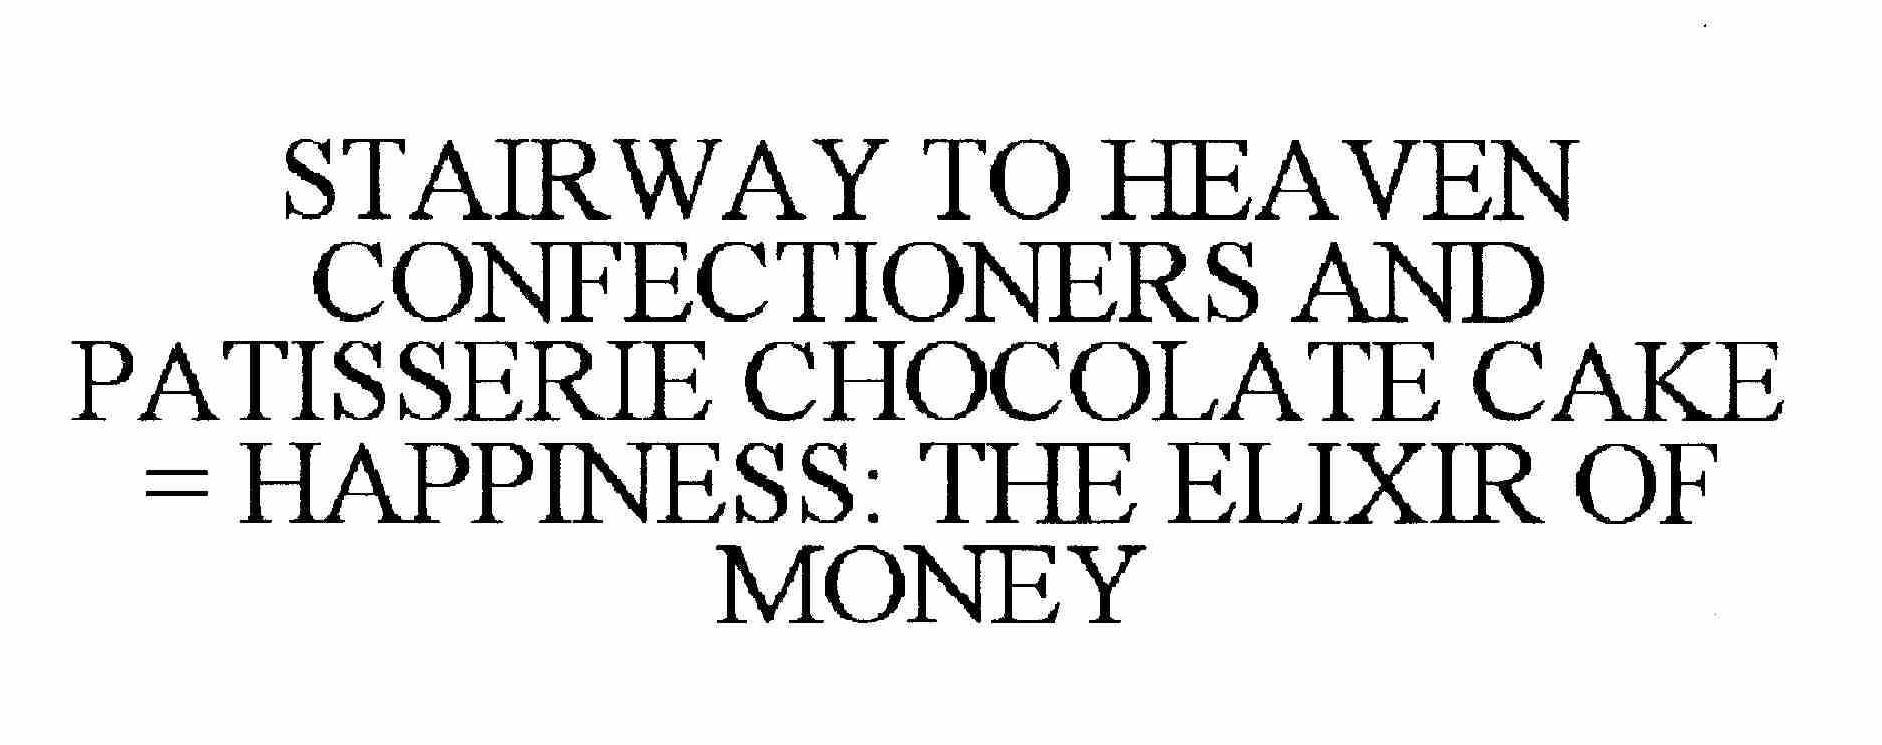  STAIRWAY TO HEAVEN CONFECTIONERS AND PATISSERIE CHOCOLATE CAKE = HAPPINESS: THE ELIXIR OF MONEY